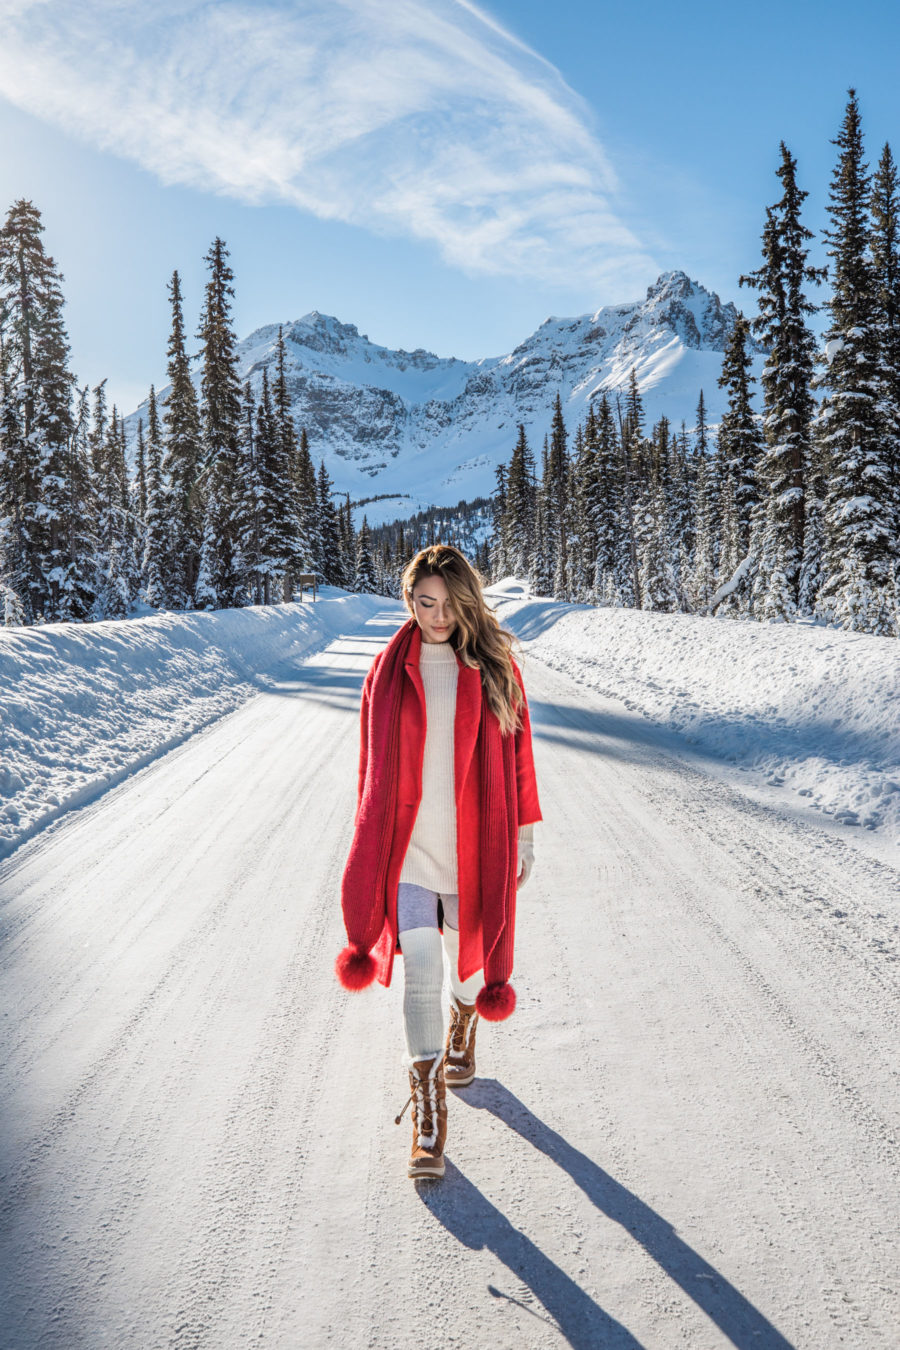 Winter Packing Tips - Red Coat with Pom Pom Scarf and Snow Boots // Notjessfashion.com